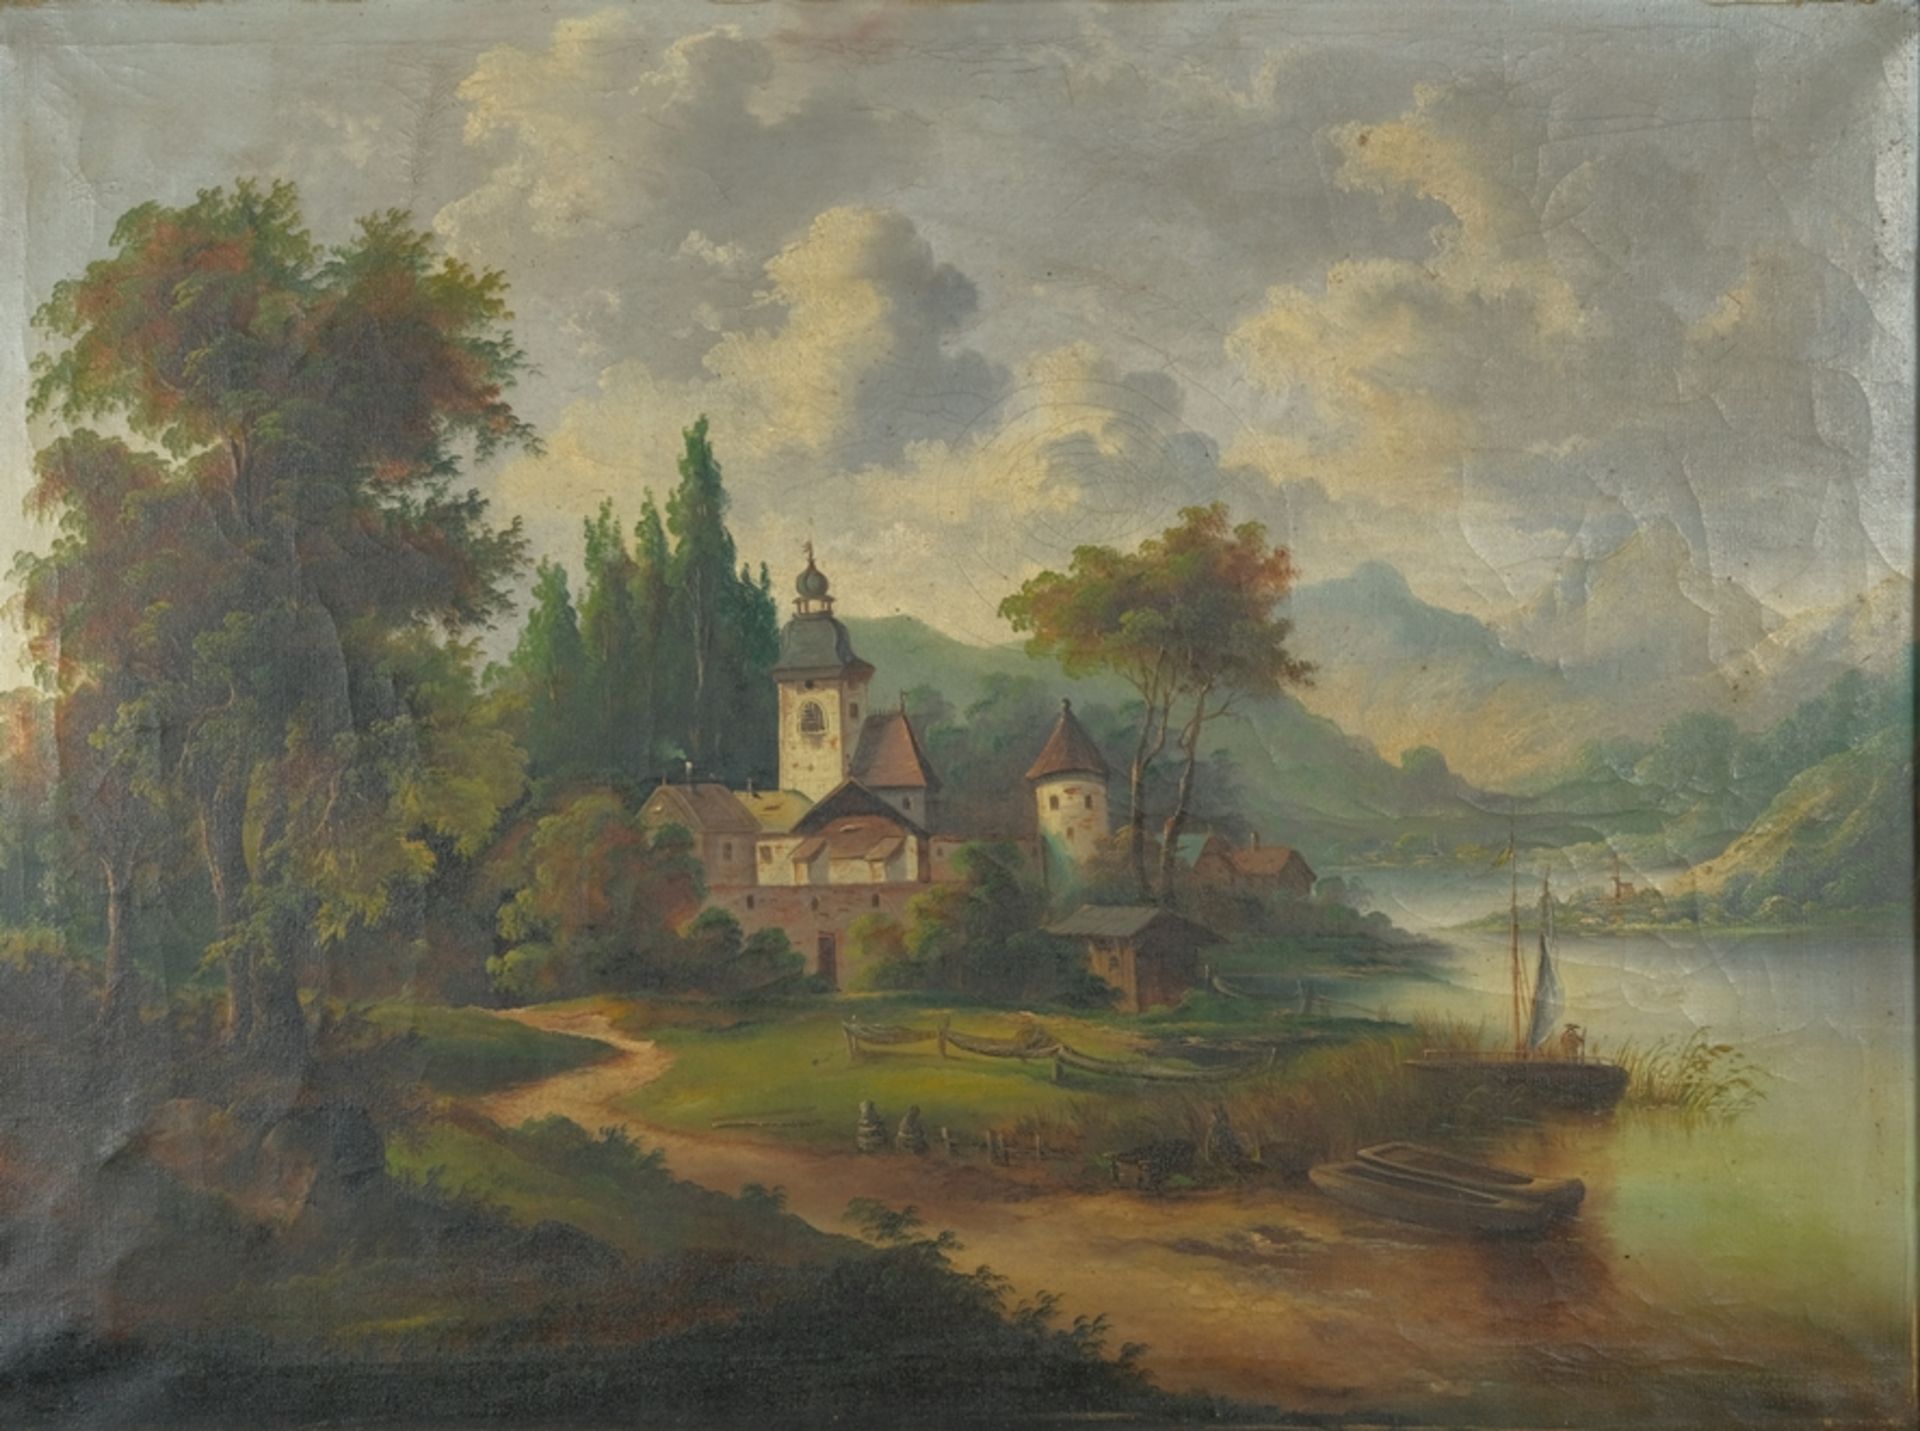 UNKNOWN "Church by the river", oil painting on canvas. 